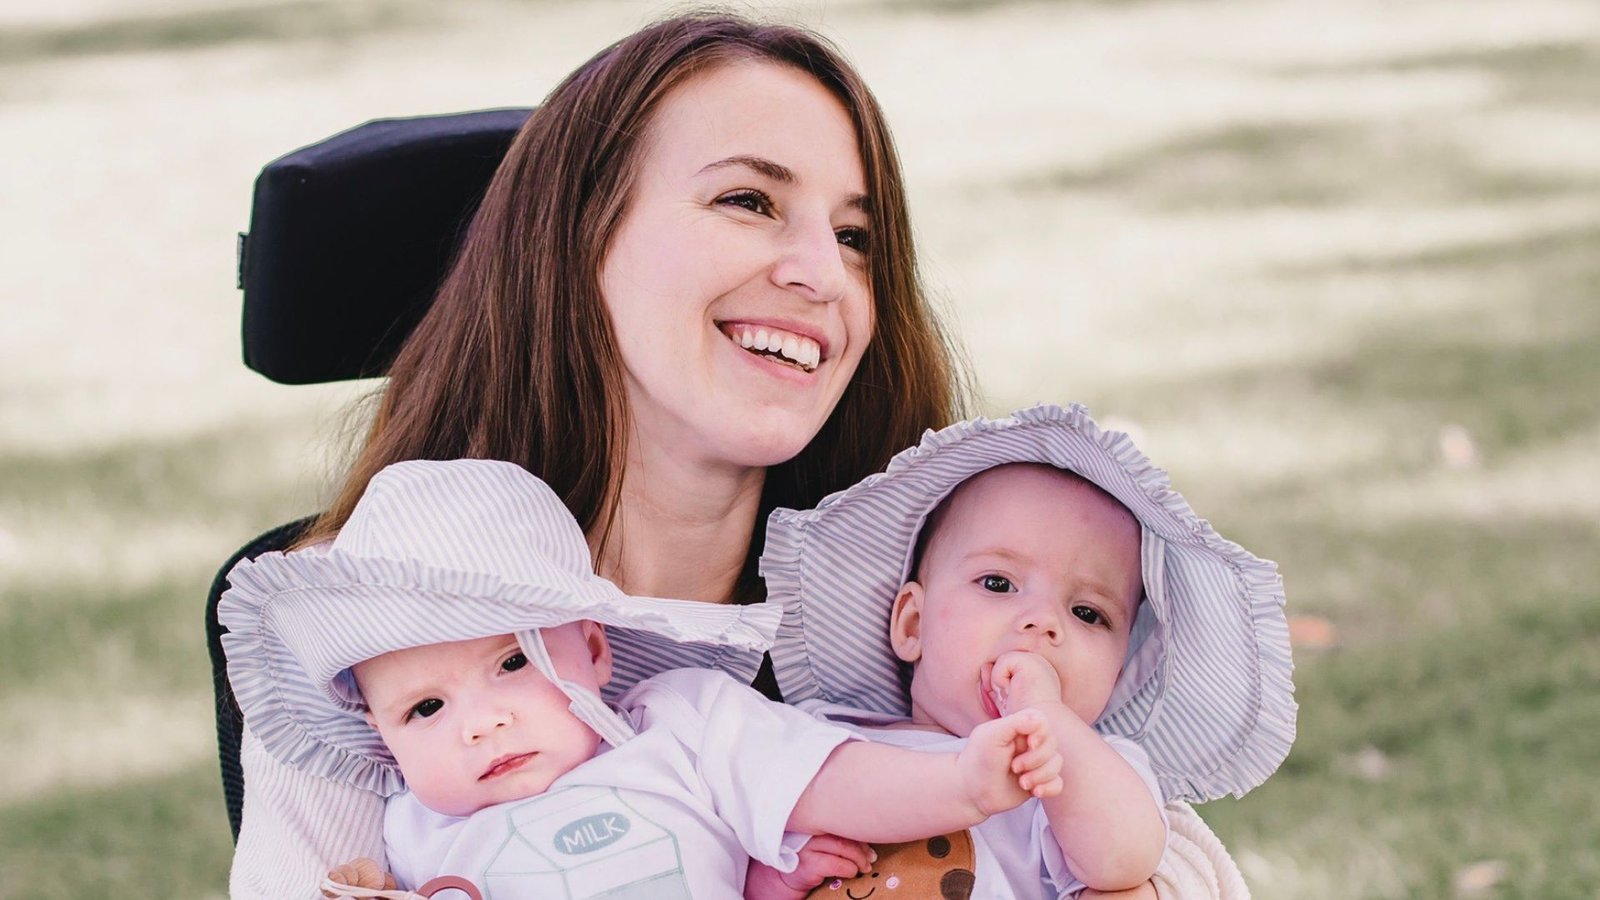 Dani Izzie smiling in her wheelchair with her twin girls.